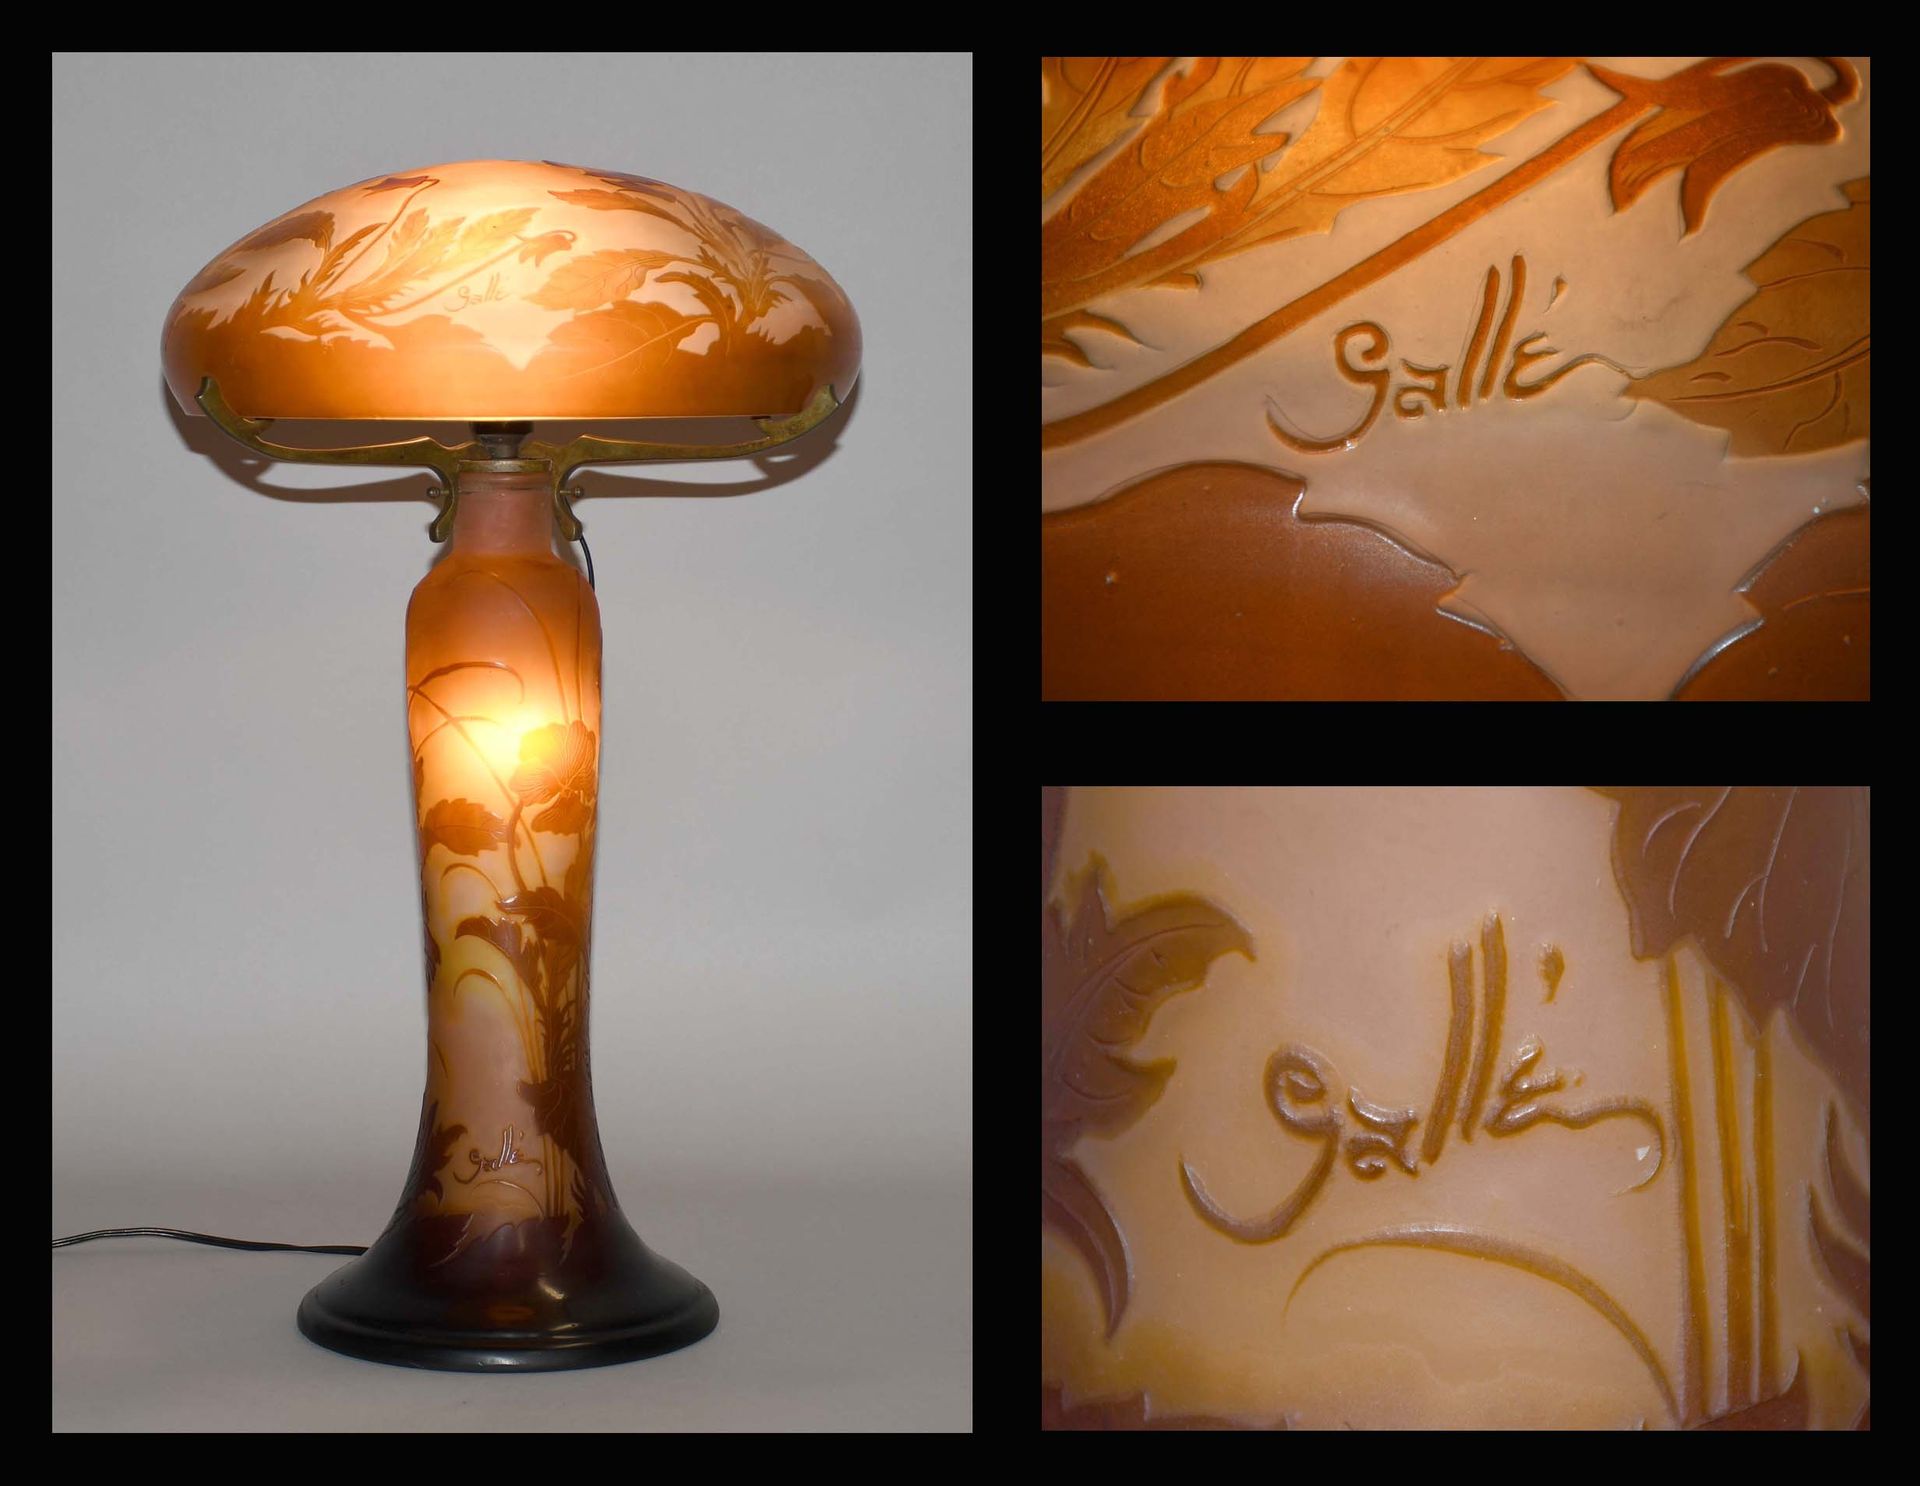 Null Emile Gallé

Mushroom lamp in brown, yellow and orange multi-layered glass &hellip;